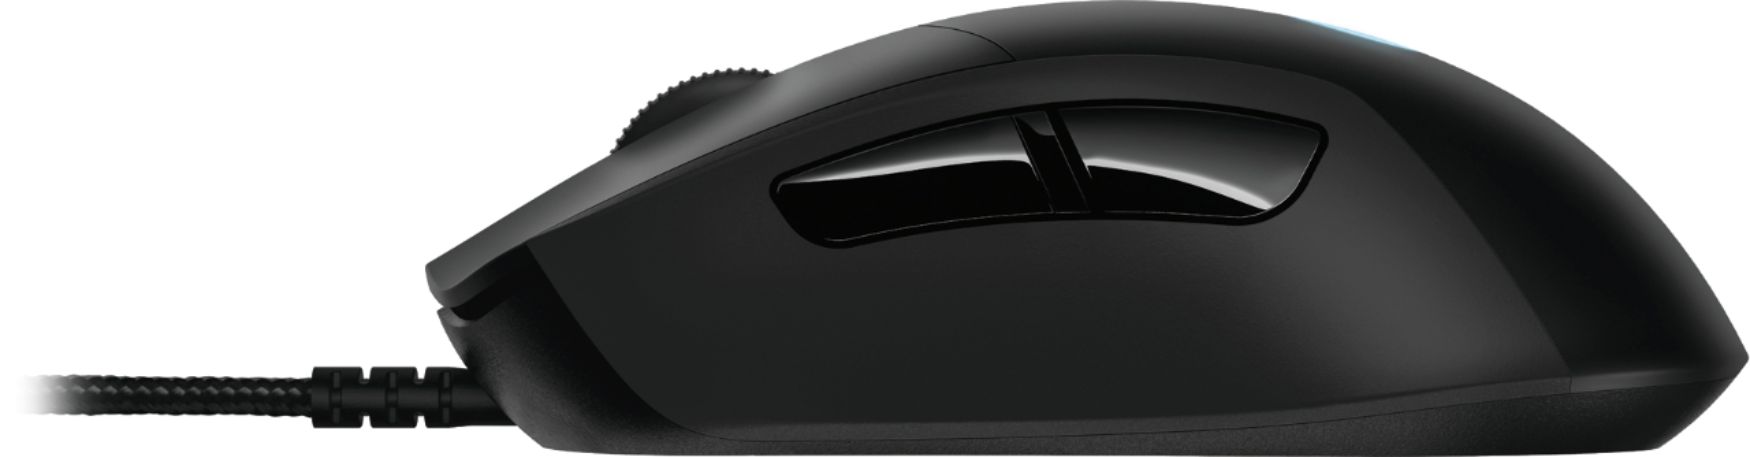 Best Buy: Logitech G403 Wired Optical Gaming Mouse with RGB